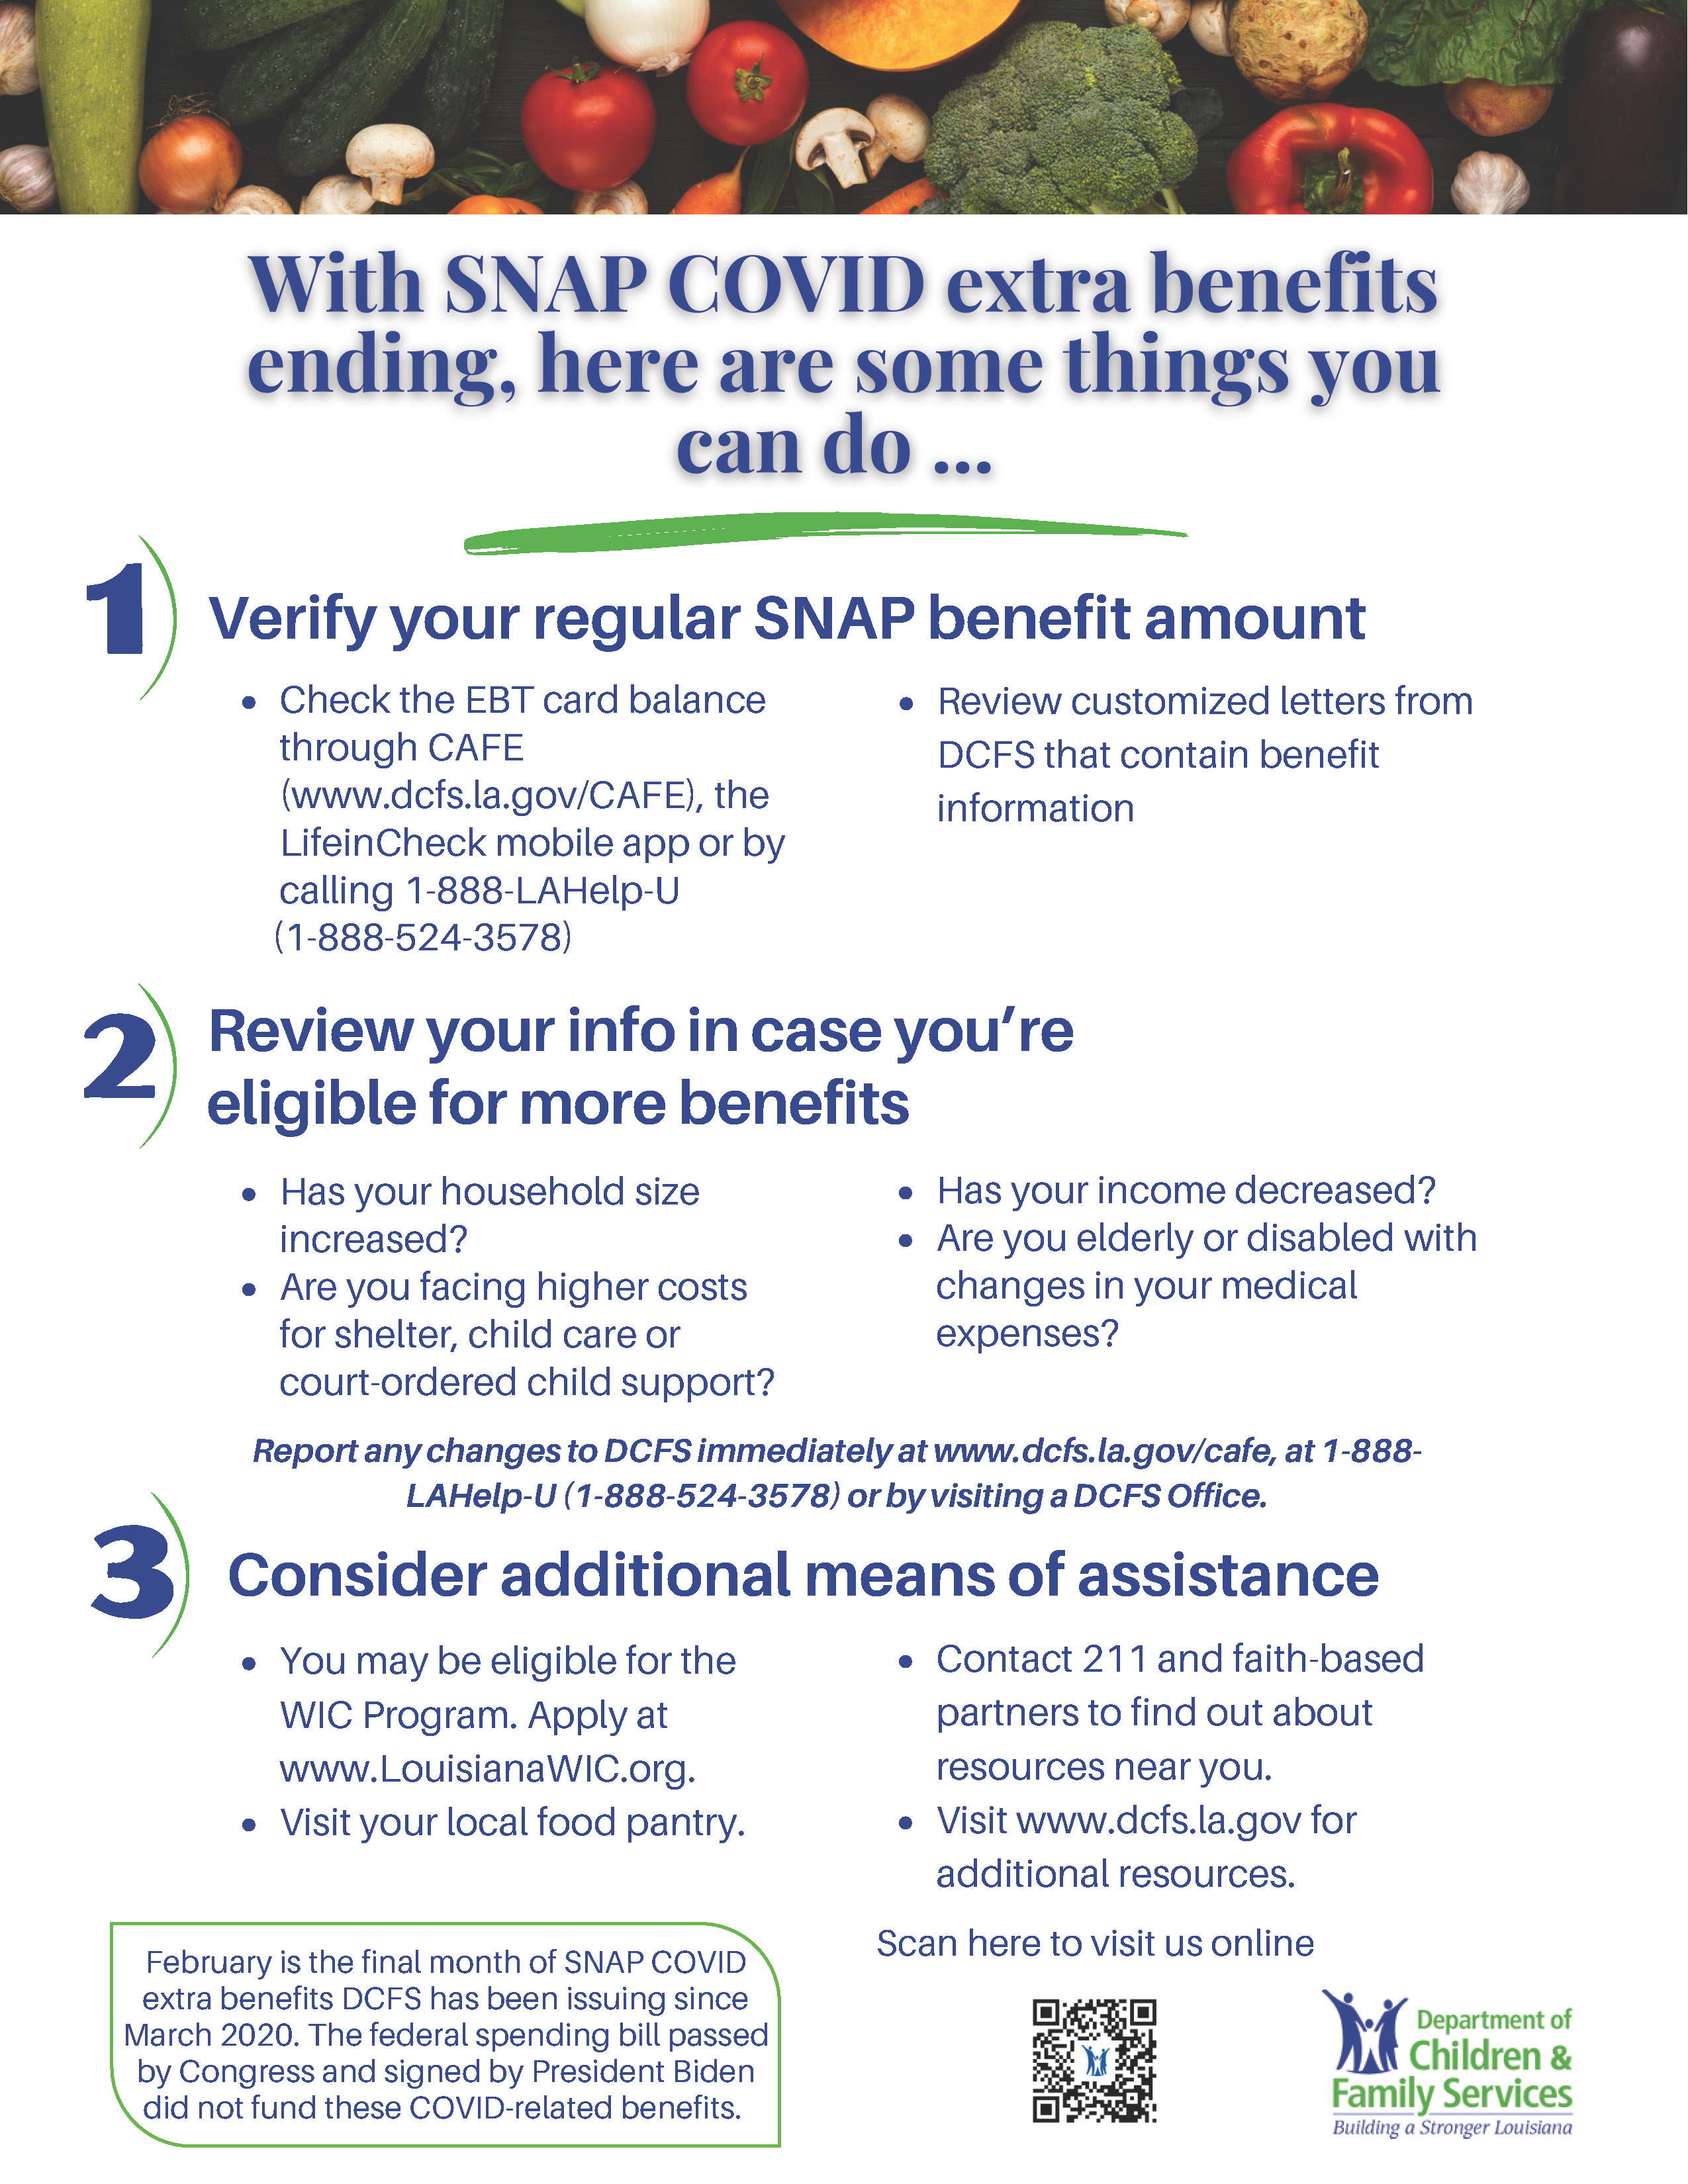 As Extra SNAP Benefits End, Recipients Encouraged to Update Info